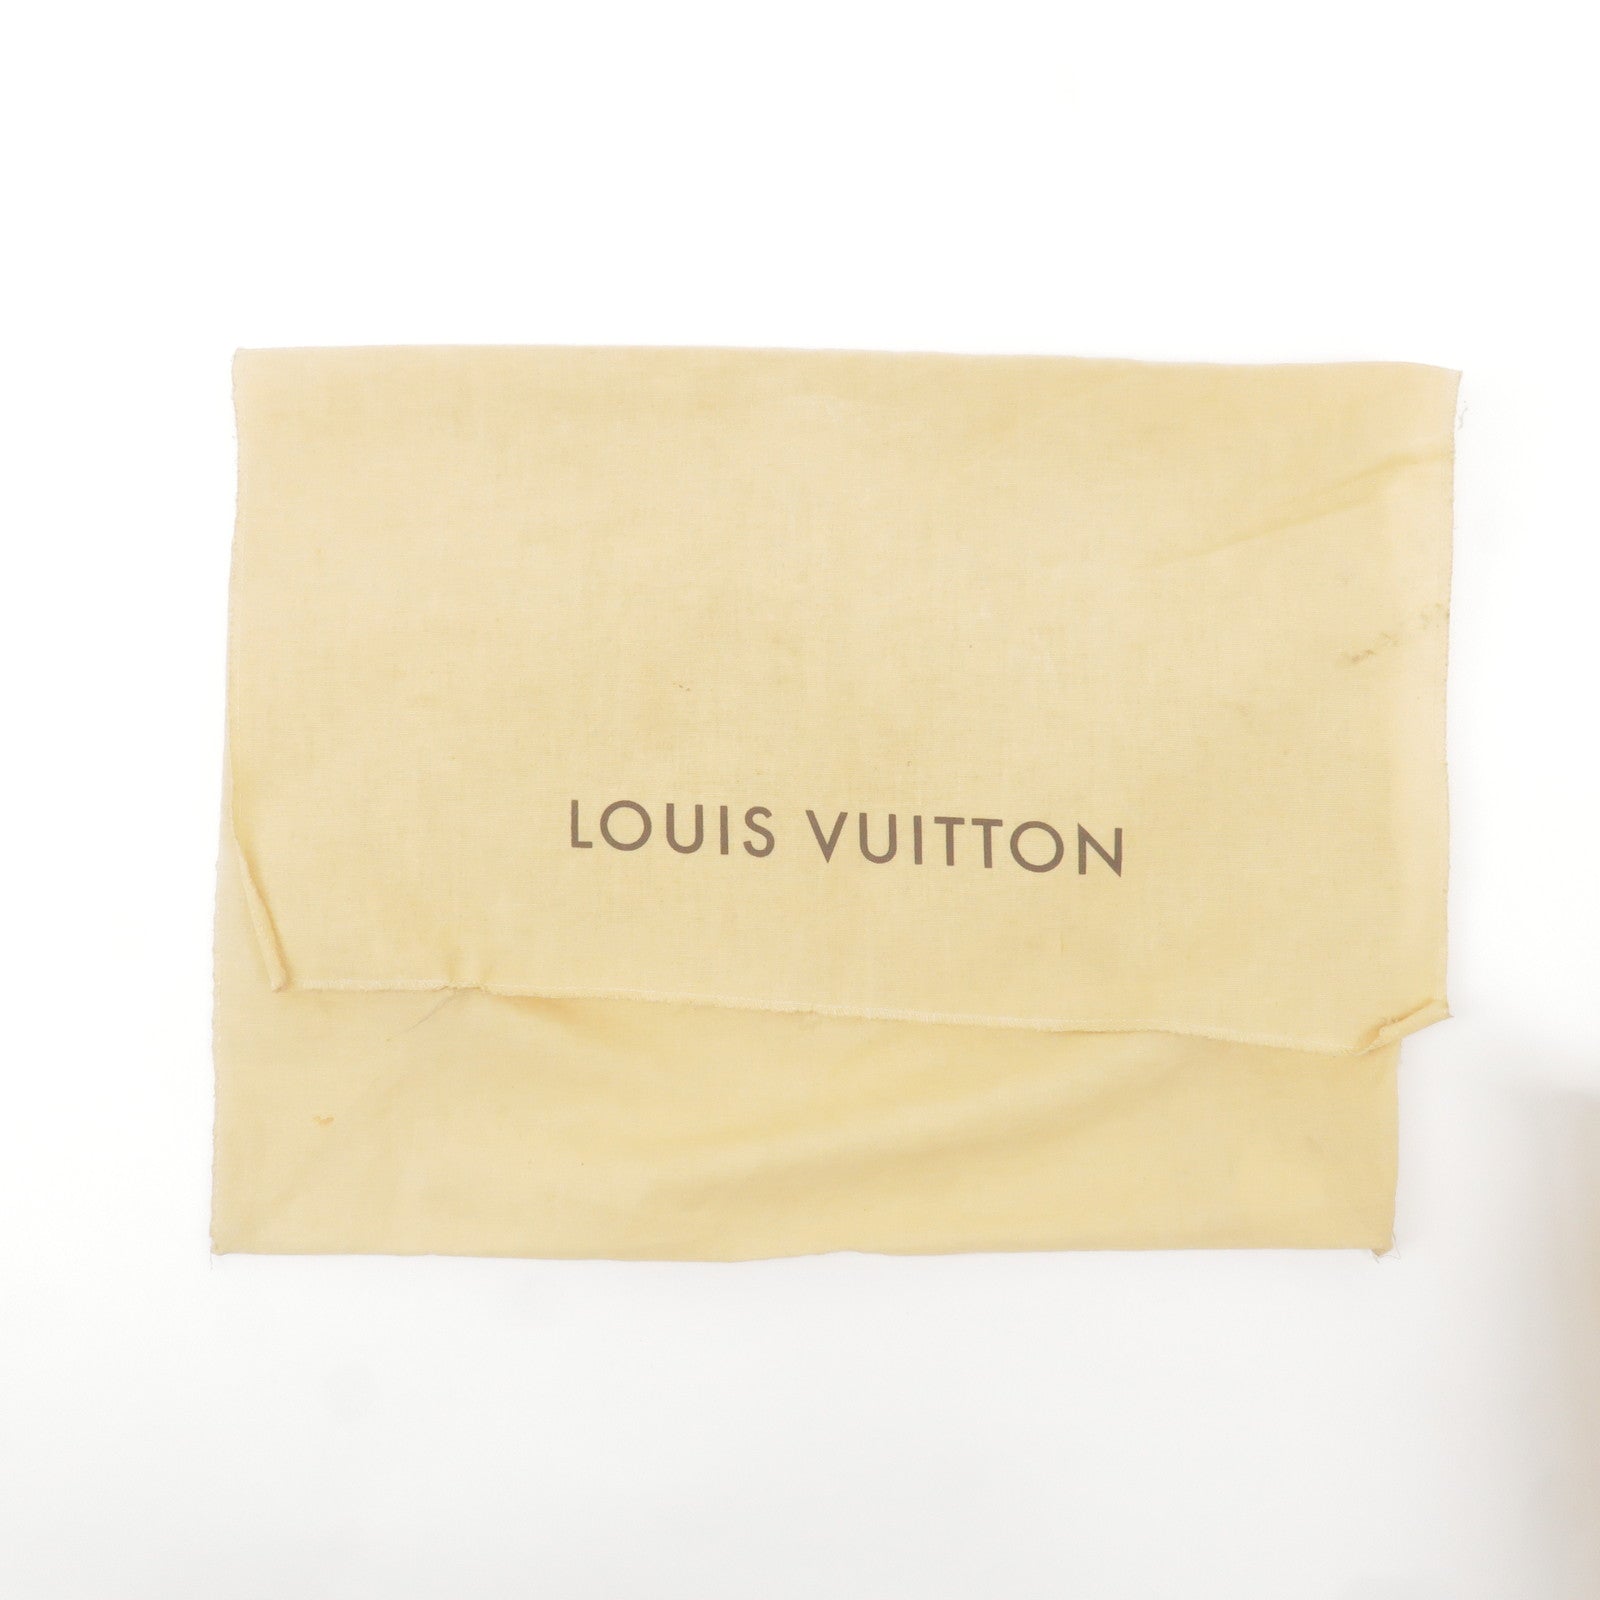 Others Write Off Yves Saint Laurent Cotton Dust Bags Set of 2